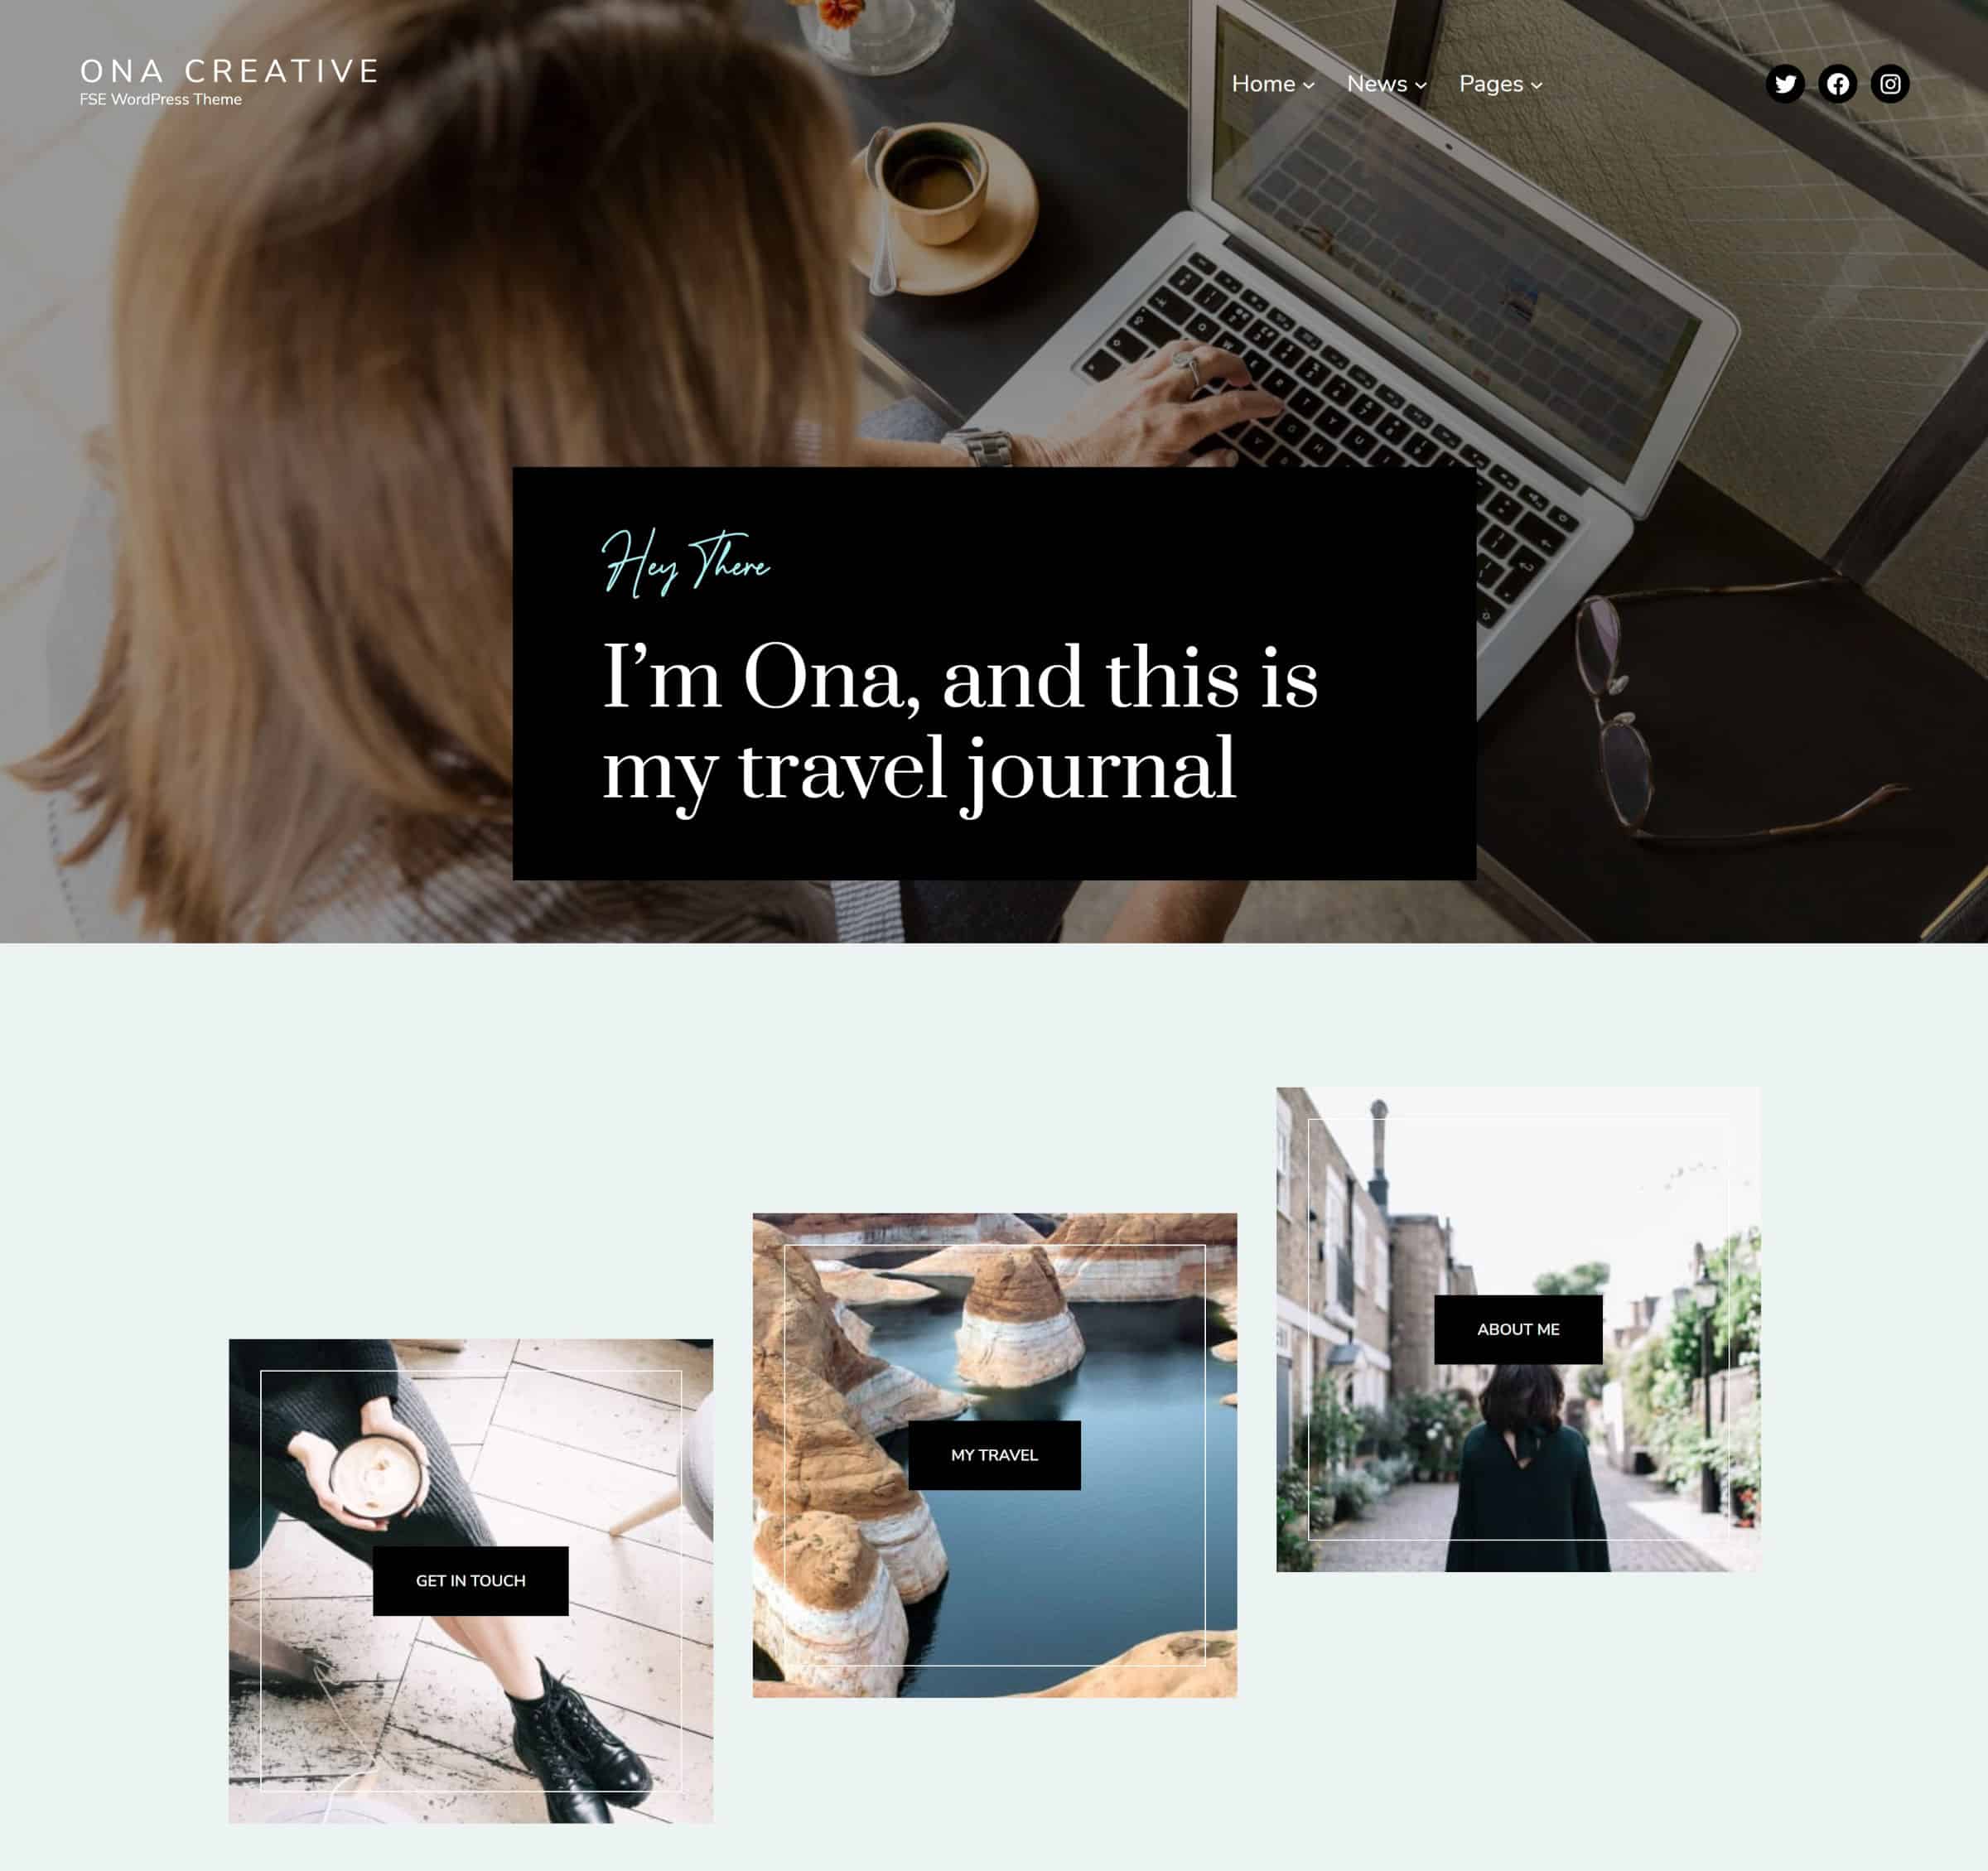 deothemes-launches-ona-creative-another-well-design-wordpress-block-theme DeoThemes 推出 Ona Creative，另一个精心设计的 WordPress 块主题